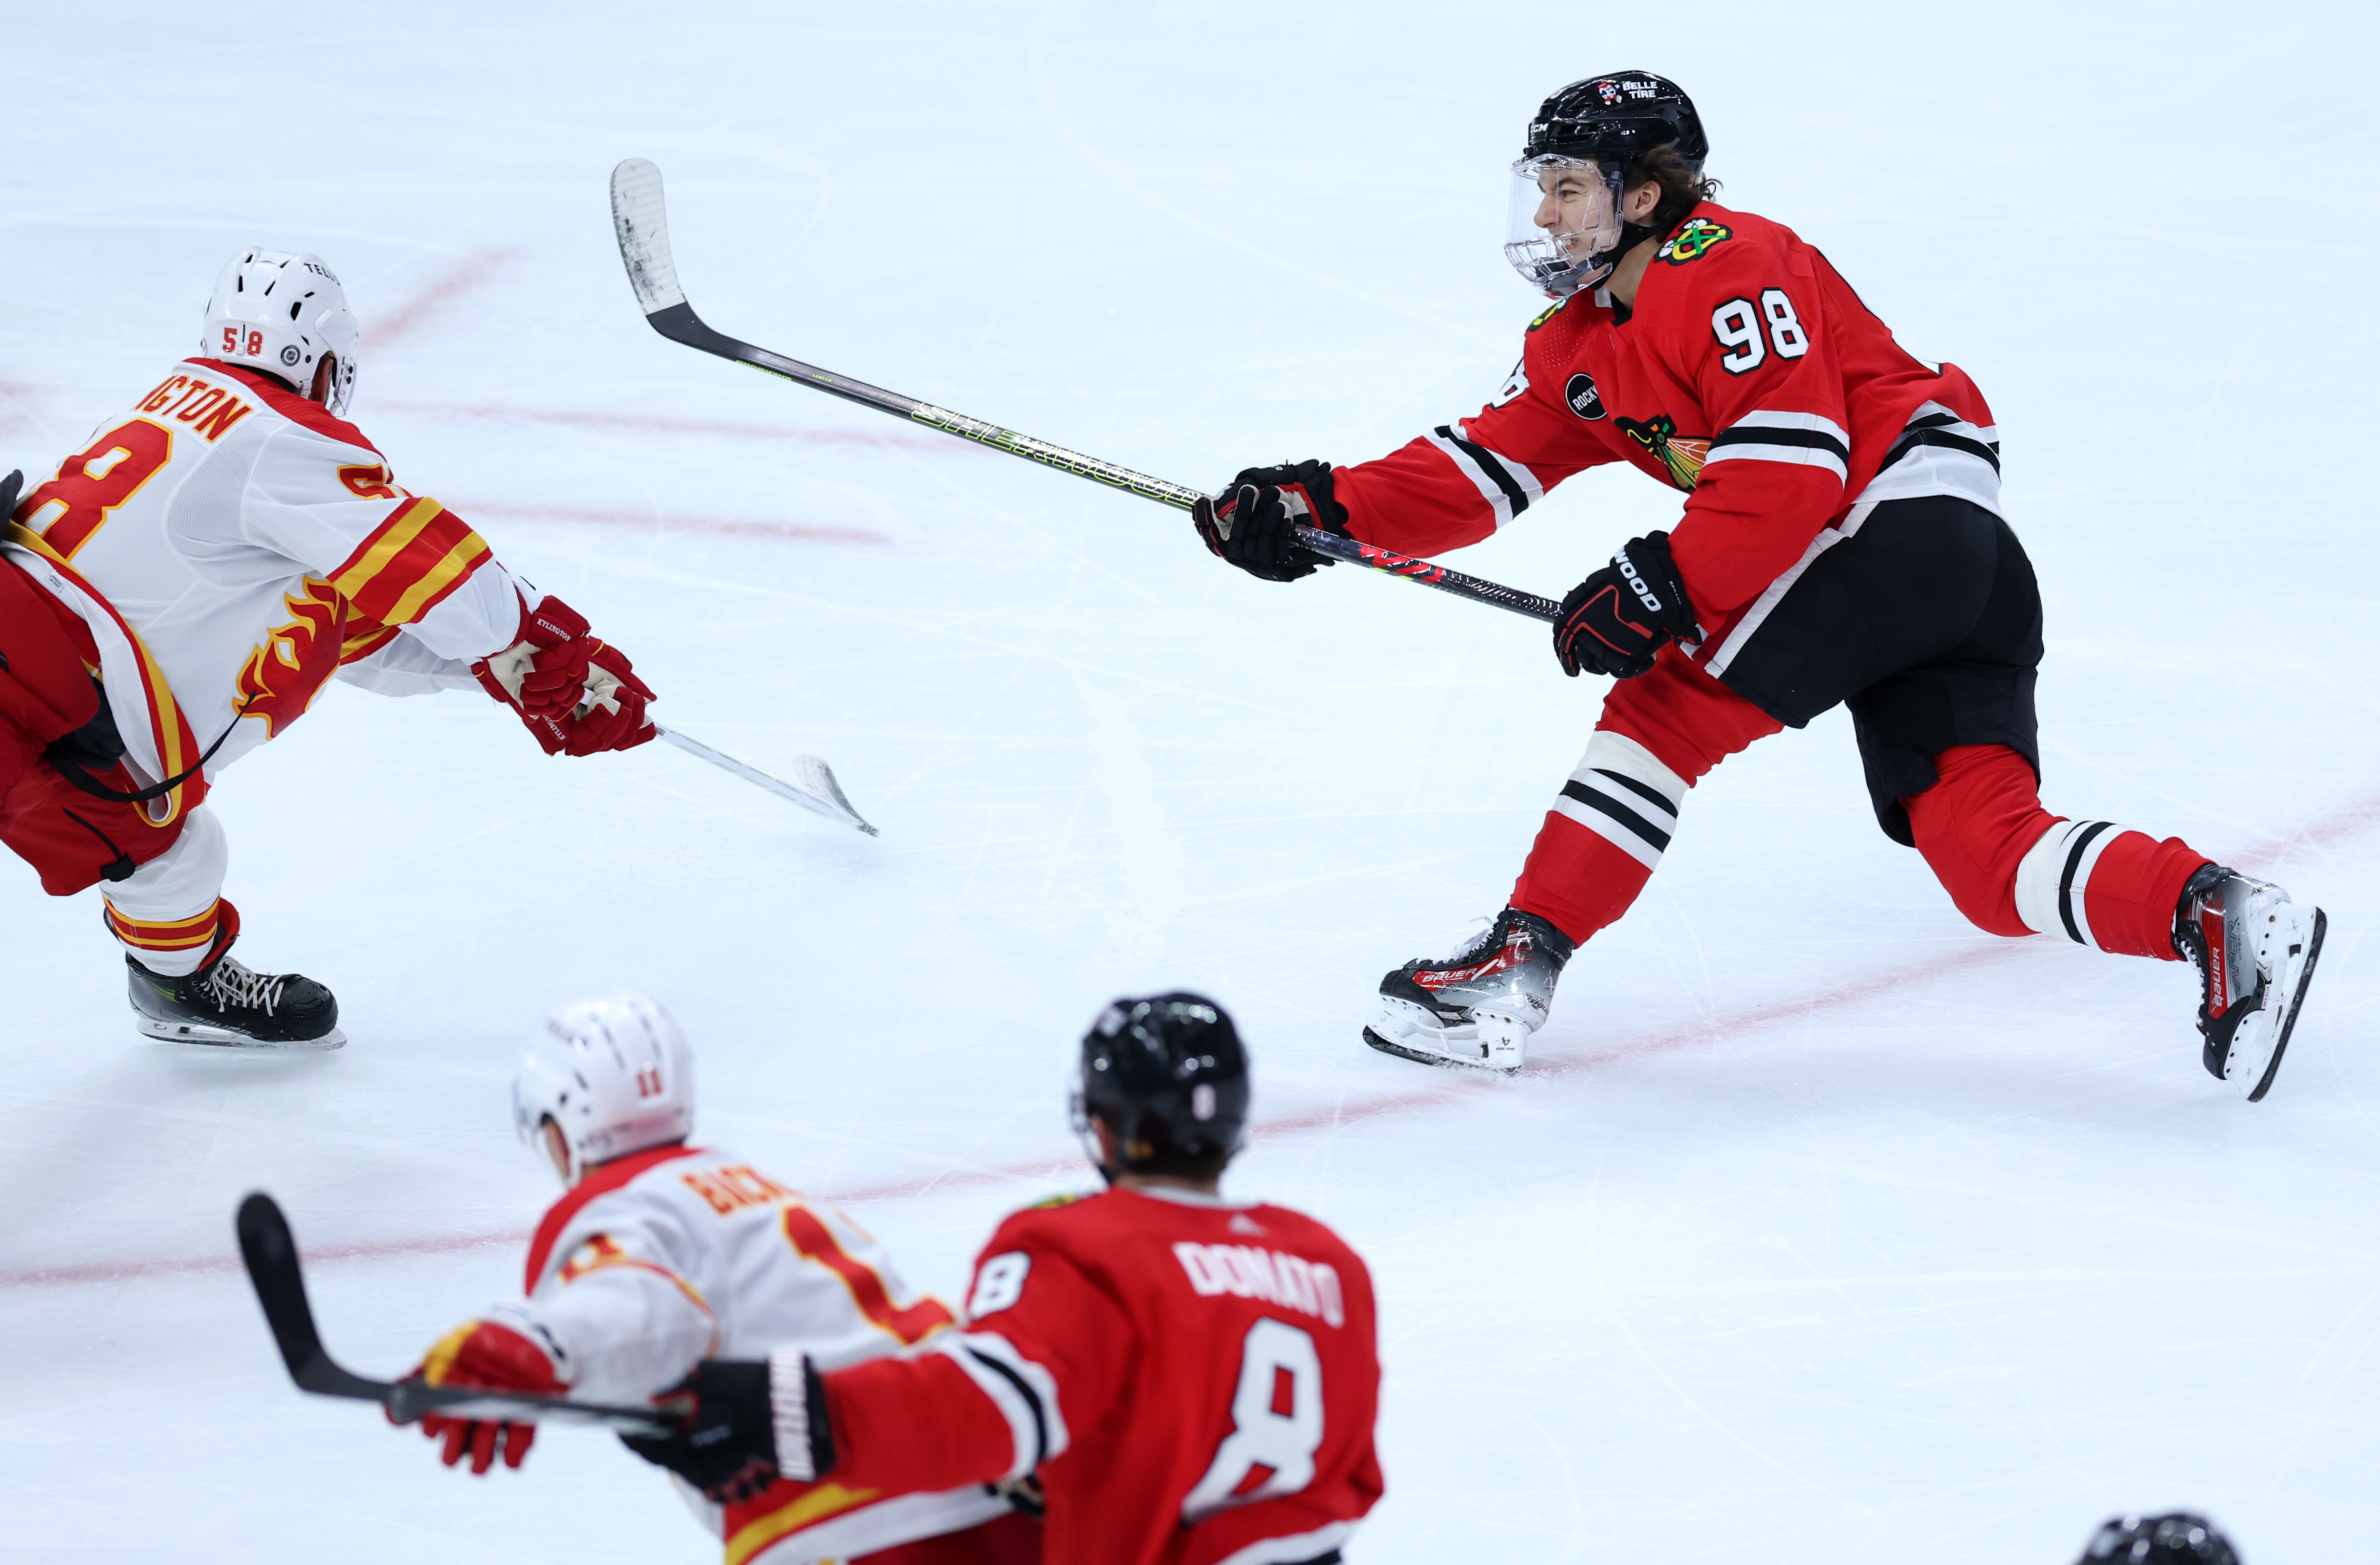 Chicago Blackhawks center Connor Bedard (98) follows through on a shot in the third period of a game against the Calgary Flames at the United Center in Chicago on March 26, 2024. (Chris Sweda/Chicago Tribune)